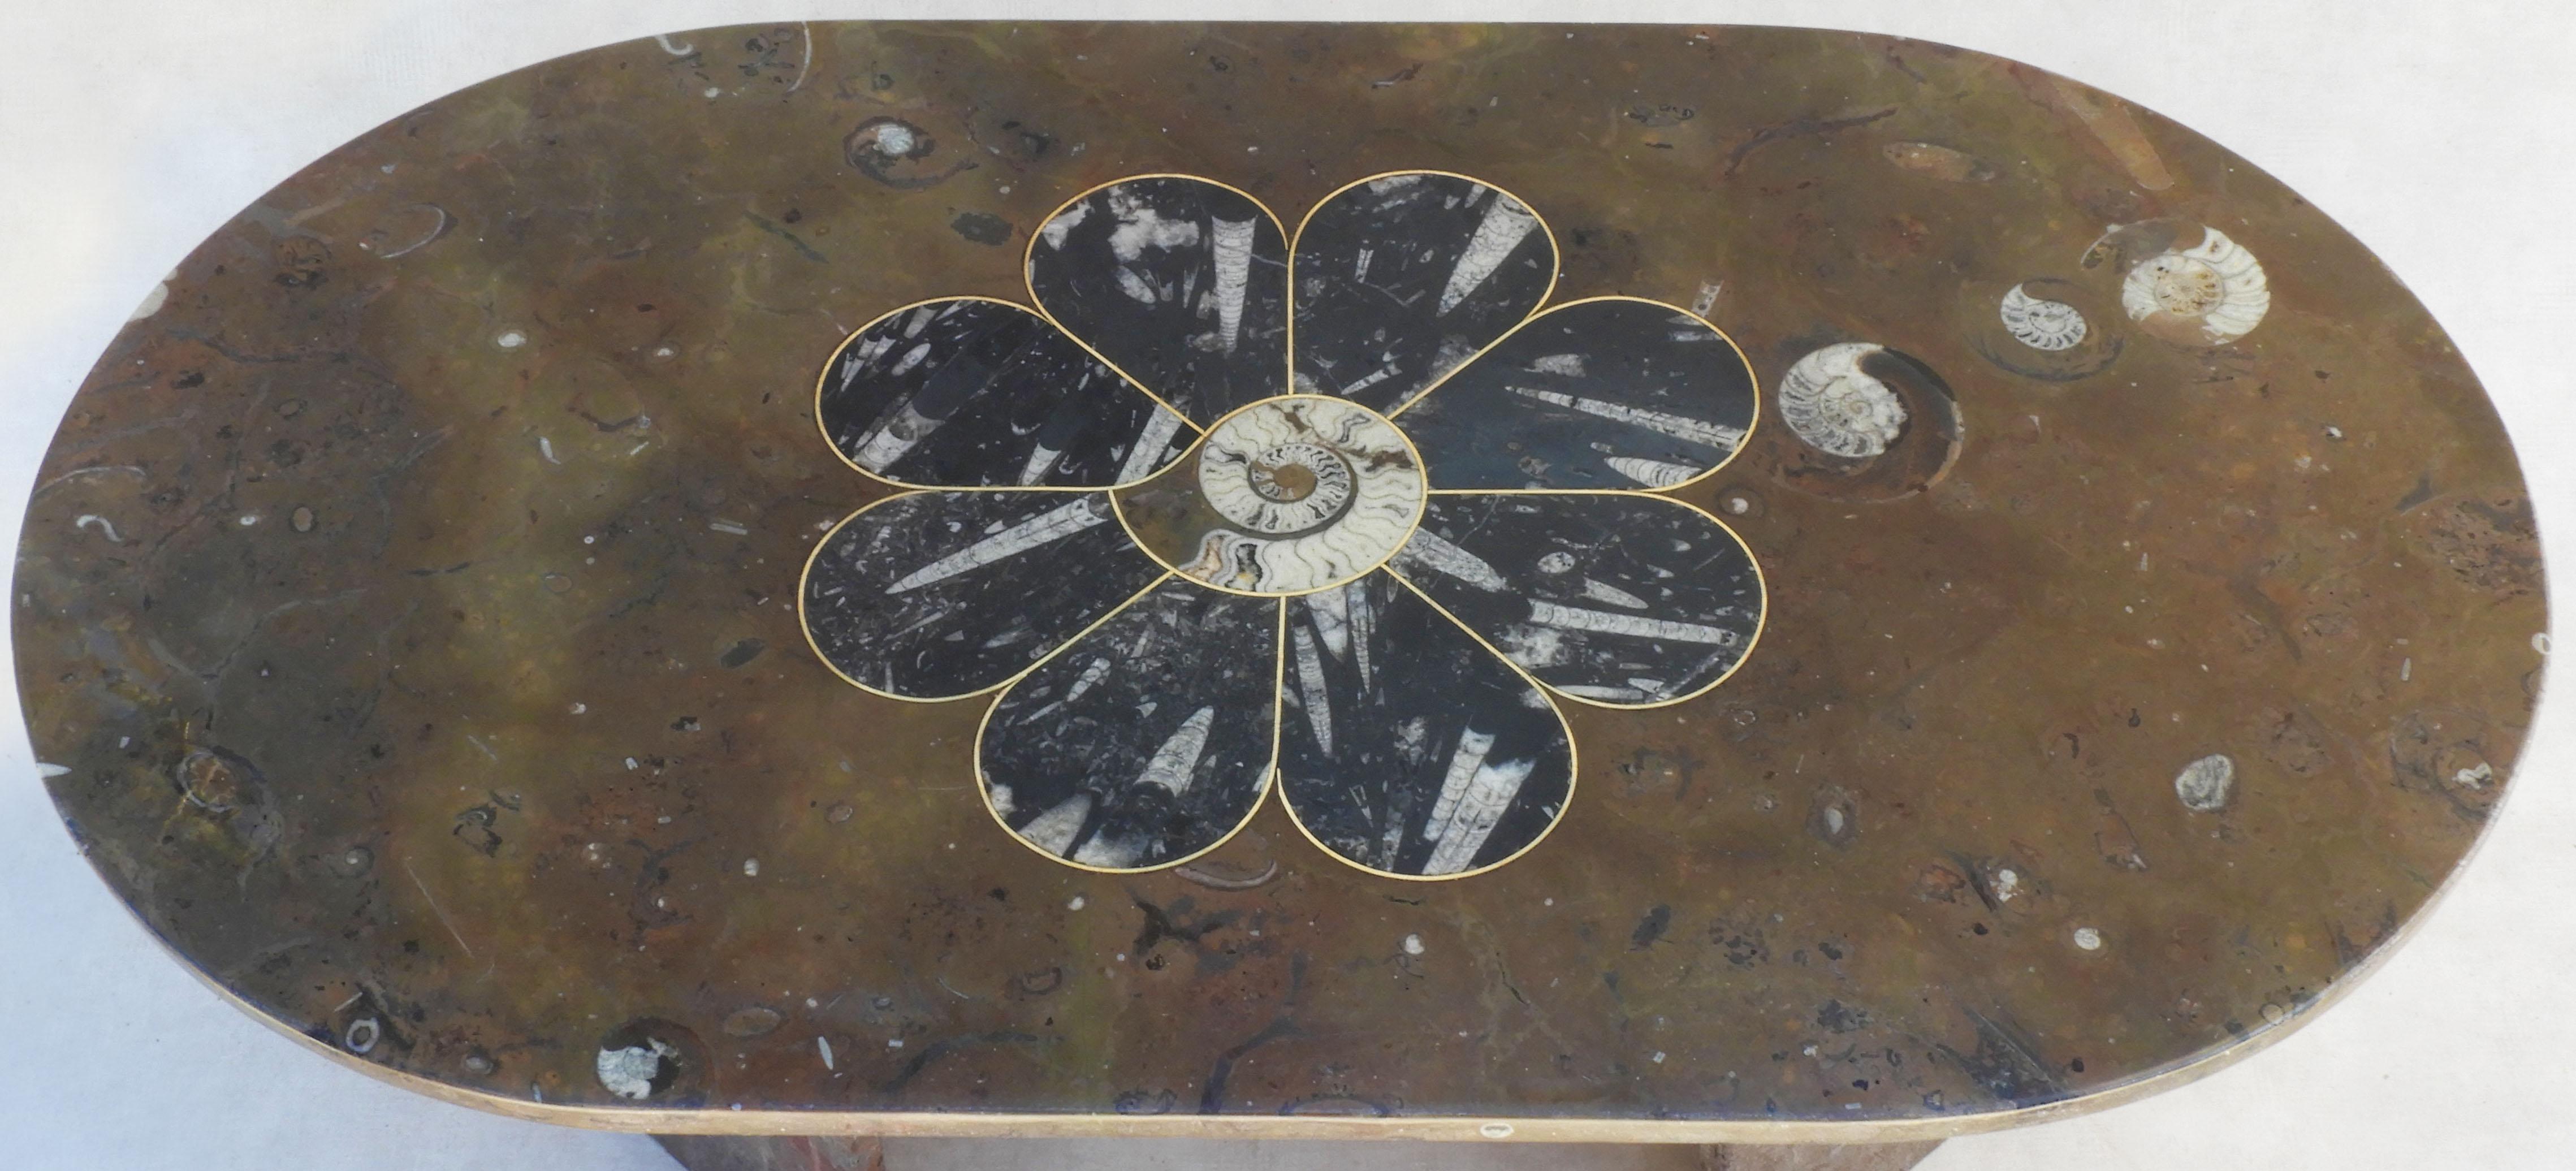 20th Century Mid Century Ammonite and Orthoceras Fossil Marble Coffee Table C1970s France For Sale